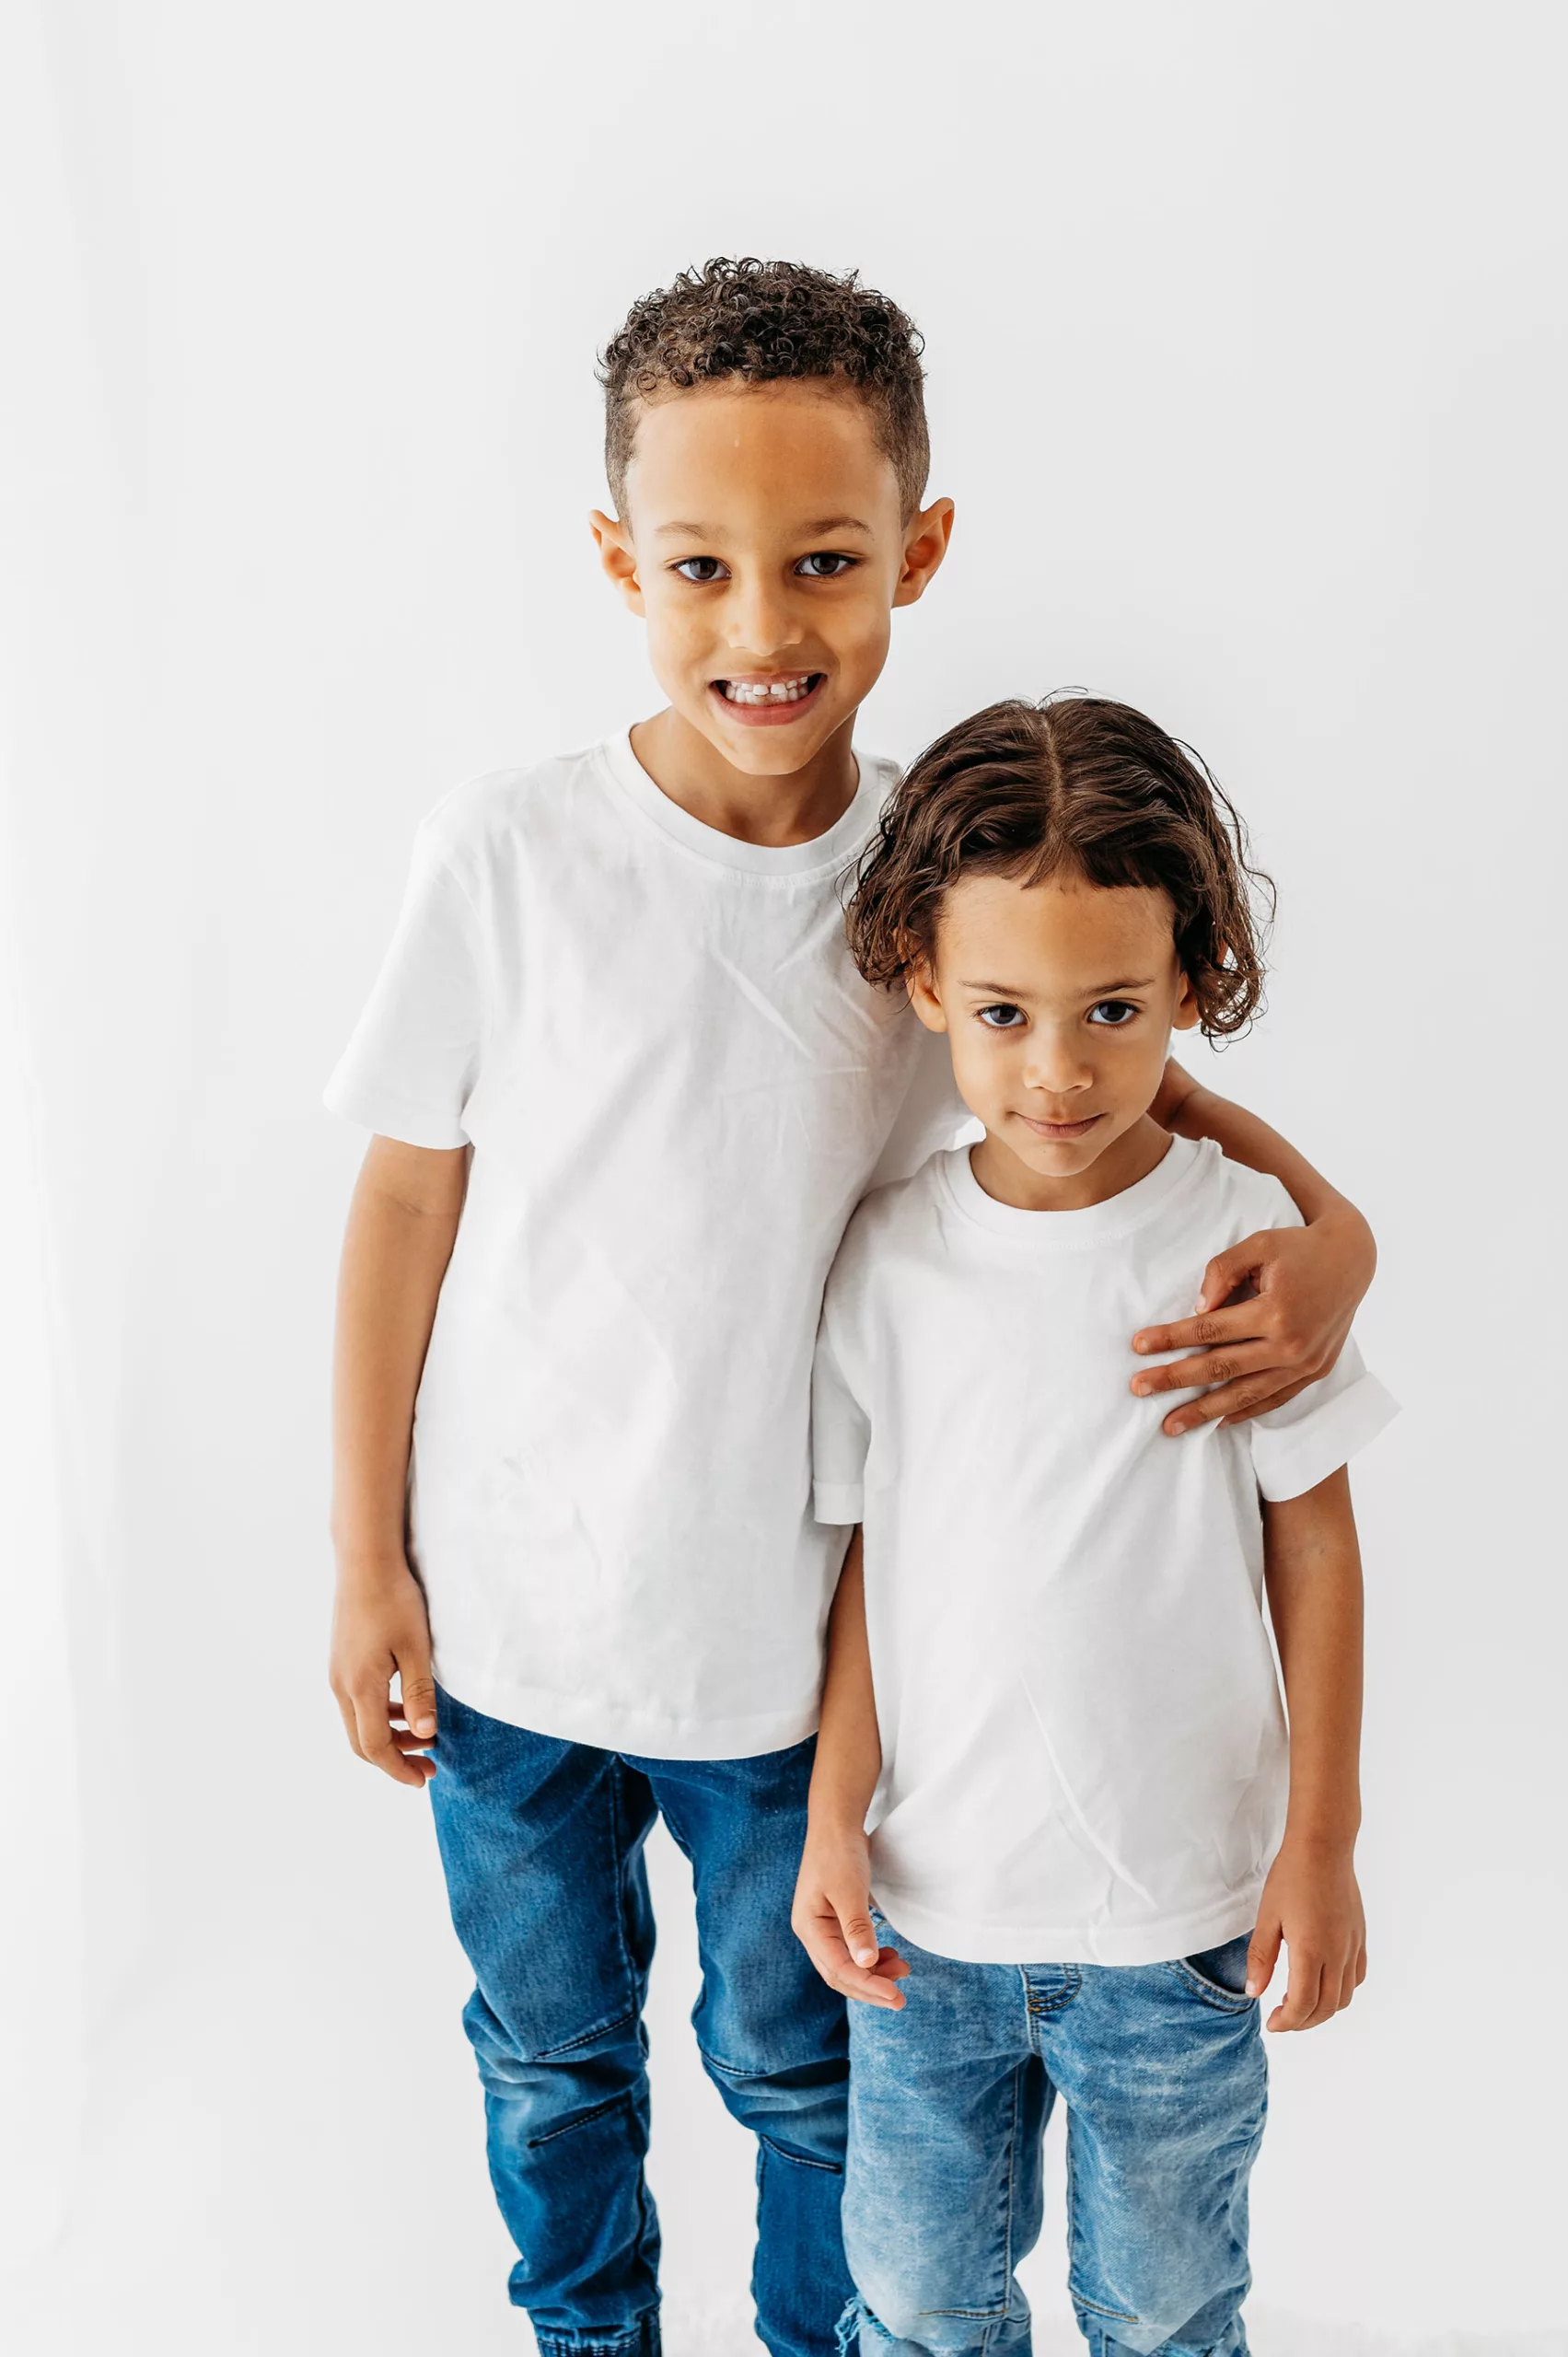 Family photoshoot- two brothers wearing white t-shirt and blue jeans